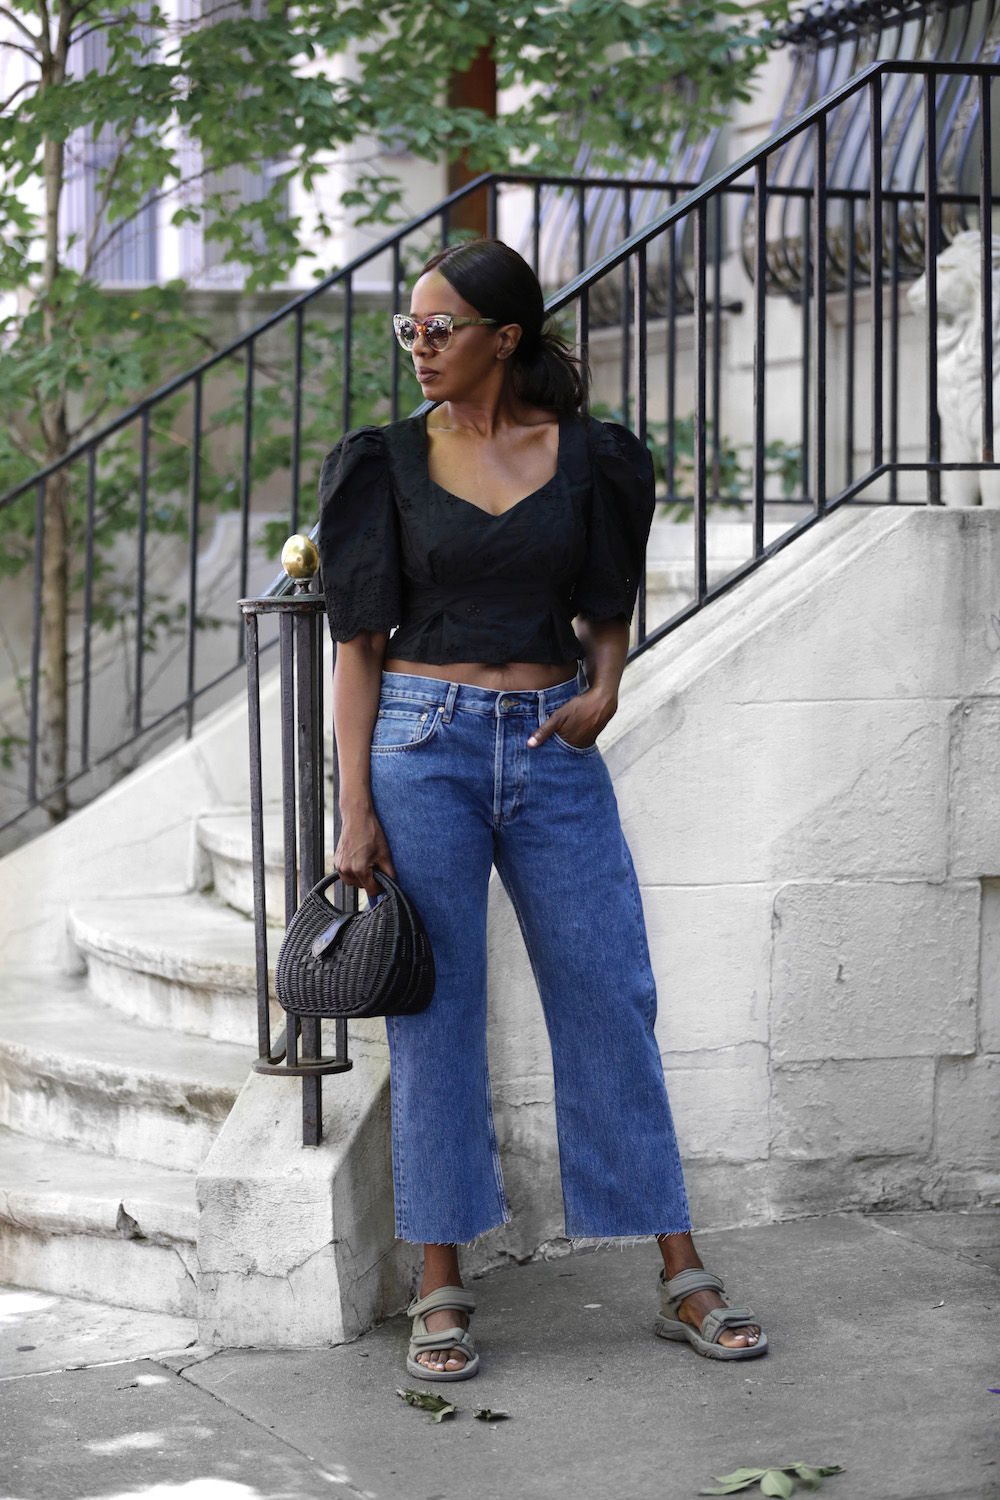 How To Wear Black In The Summer | Square Pearls